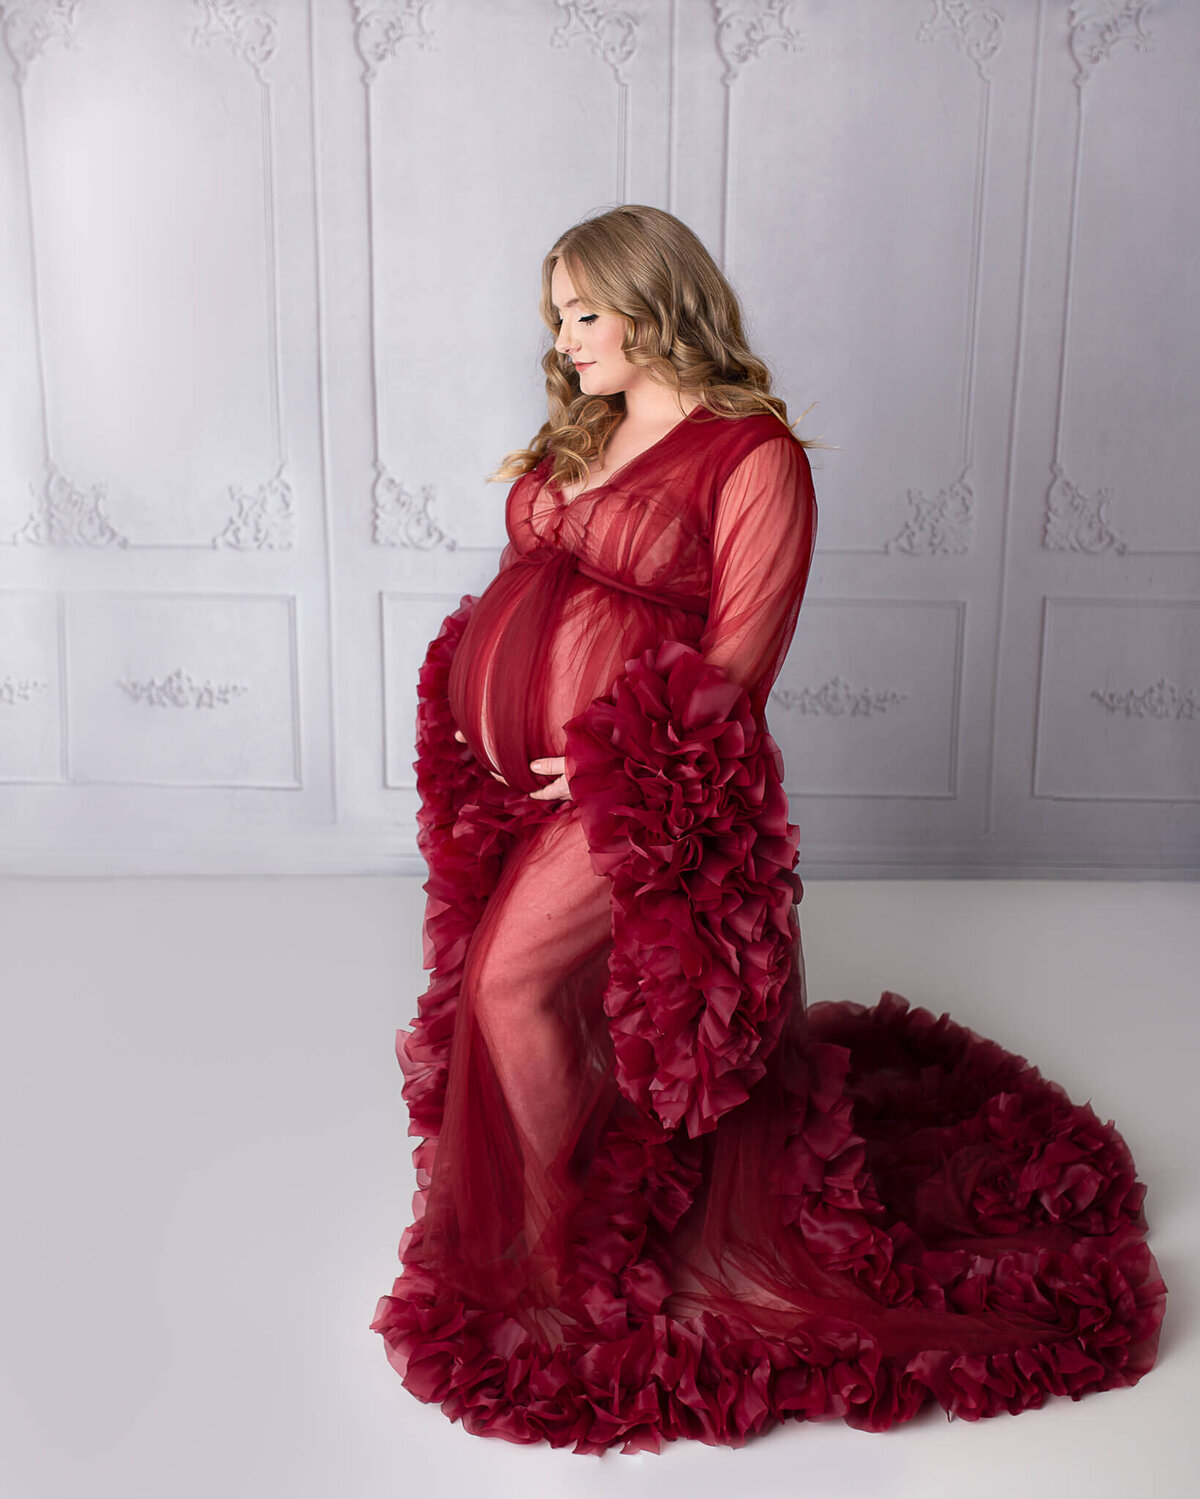 Fine art in studio maternity cleveland  with mom in sheer red dress.